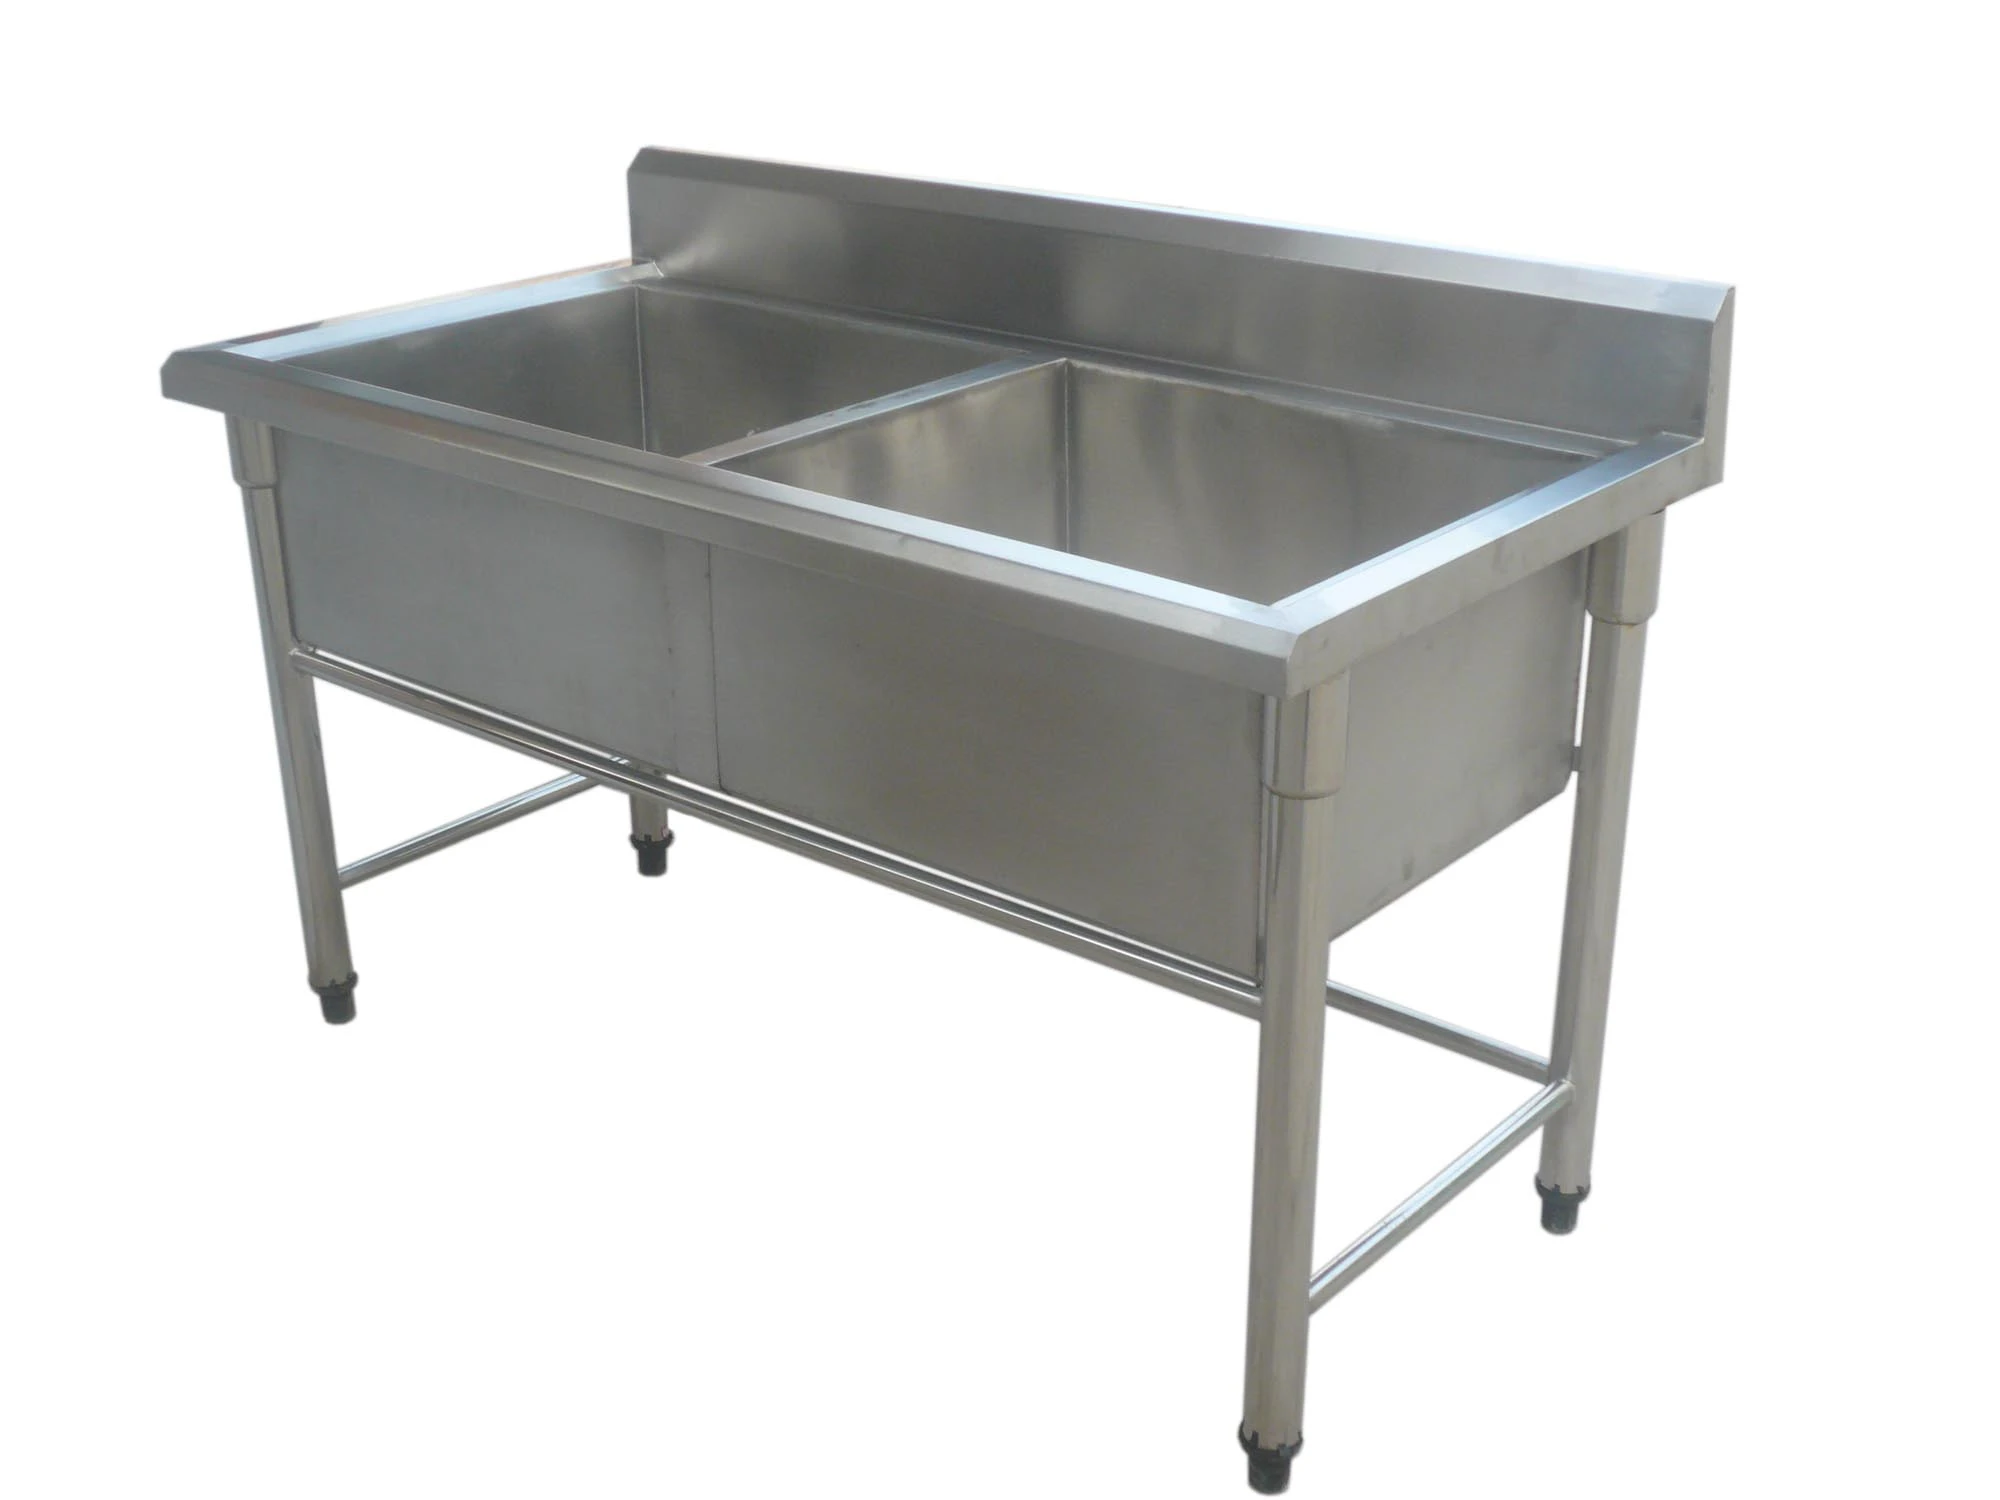 Free Standing Stainless Steel Commercial Double Bowl Kitchen Sink Manufacturer